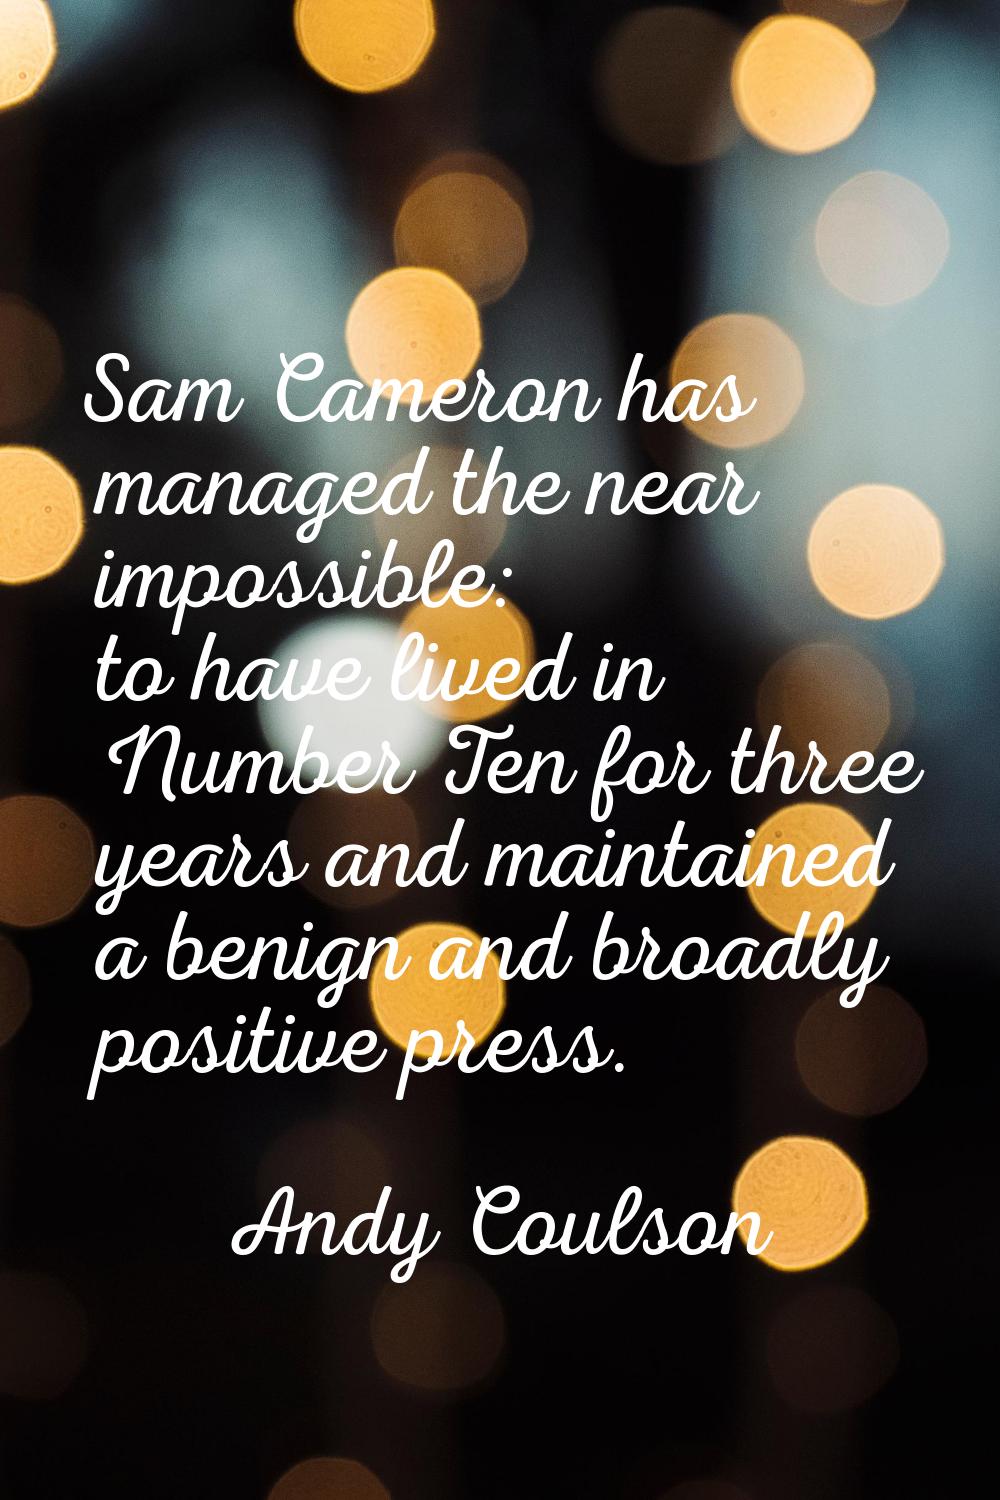 Sam Cameron has managed the near impossible: to have lived in Number Ten for three years and mainta